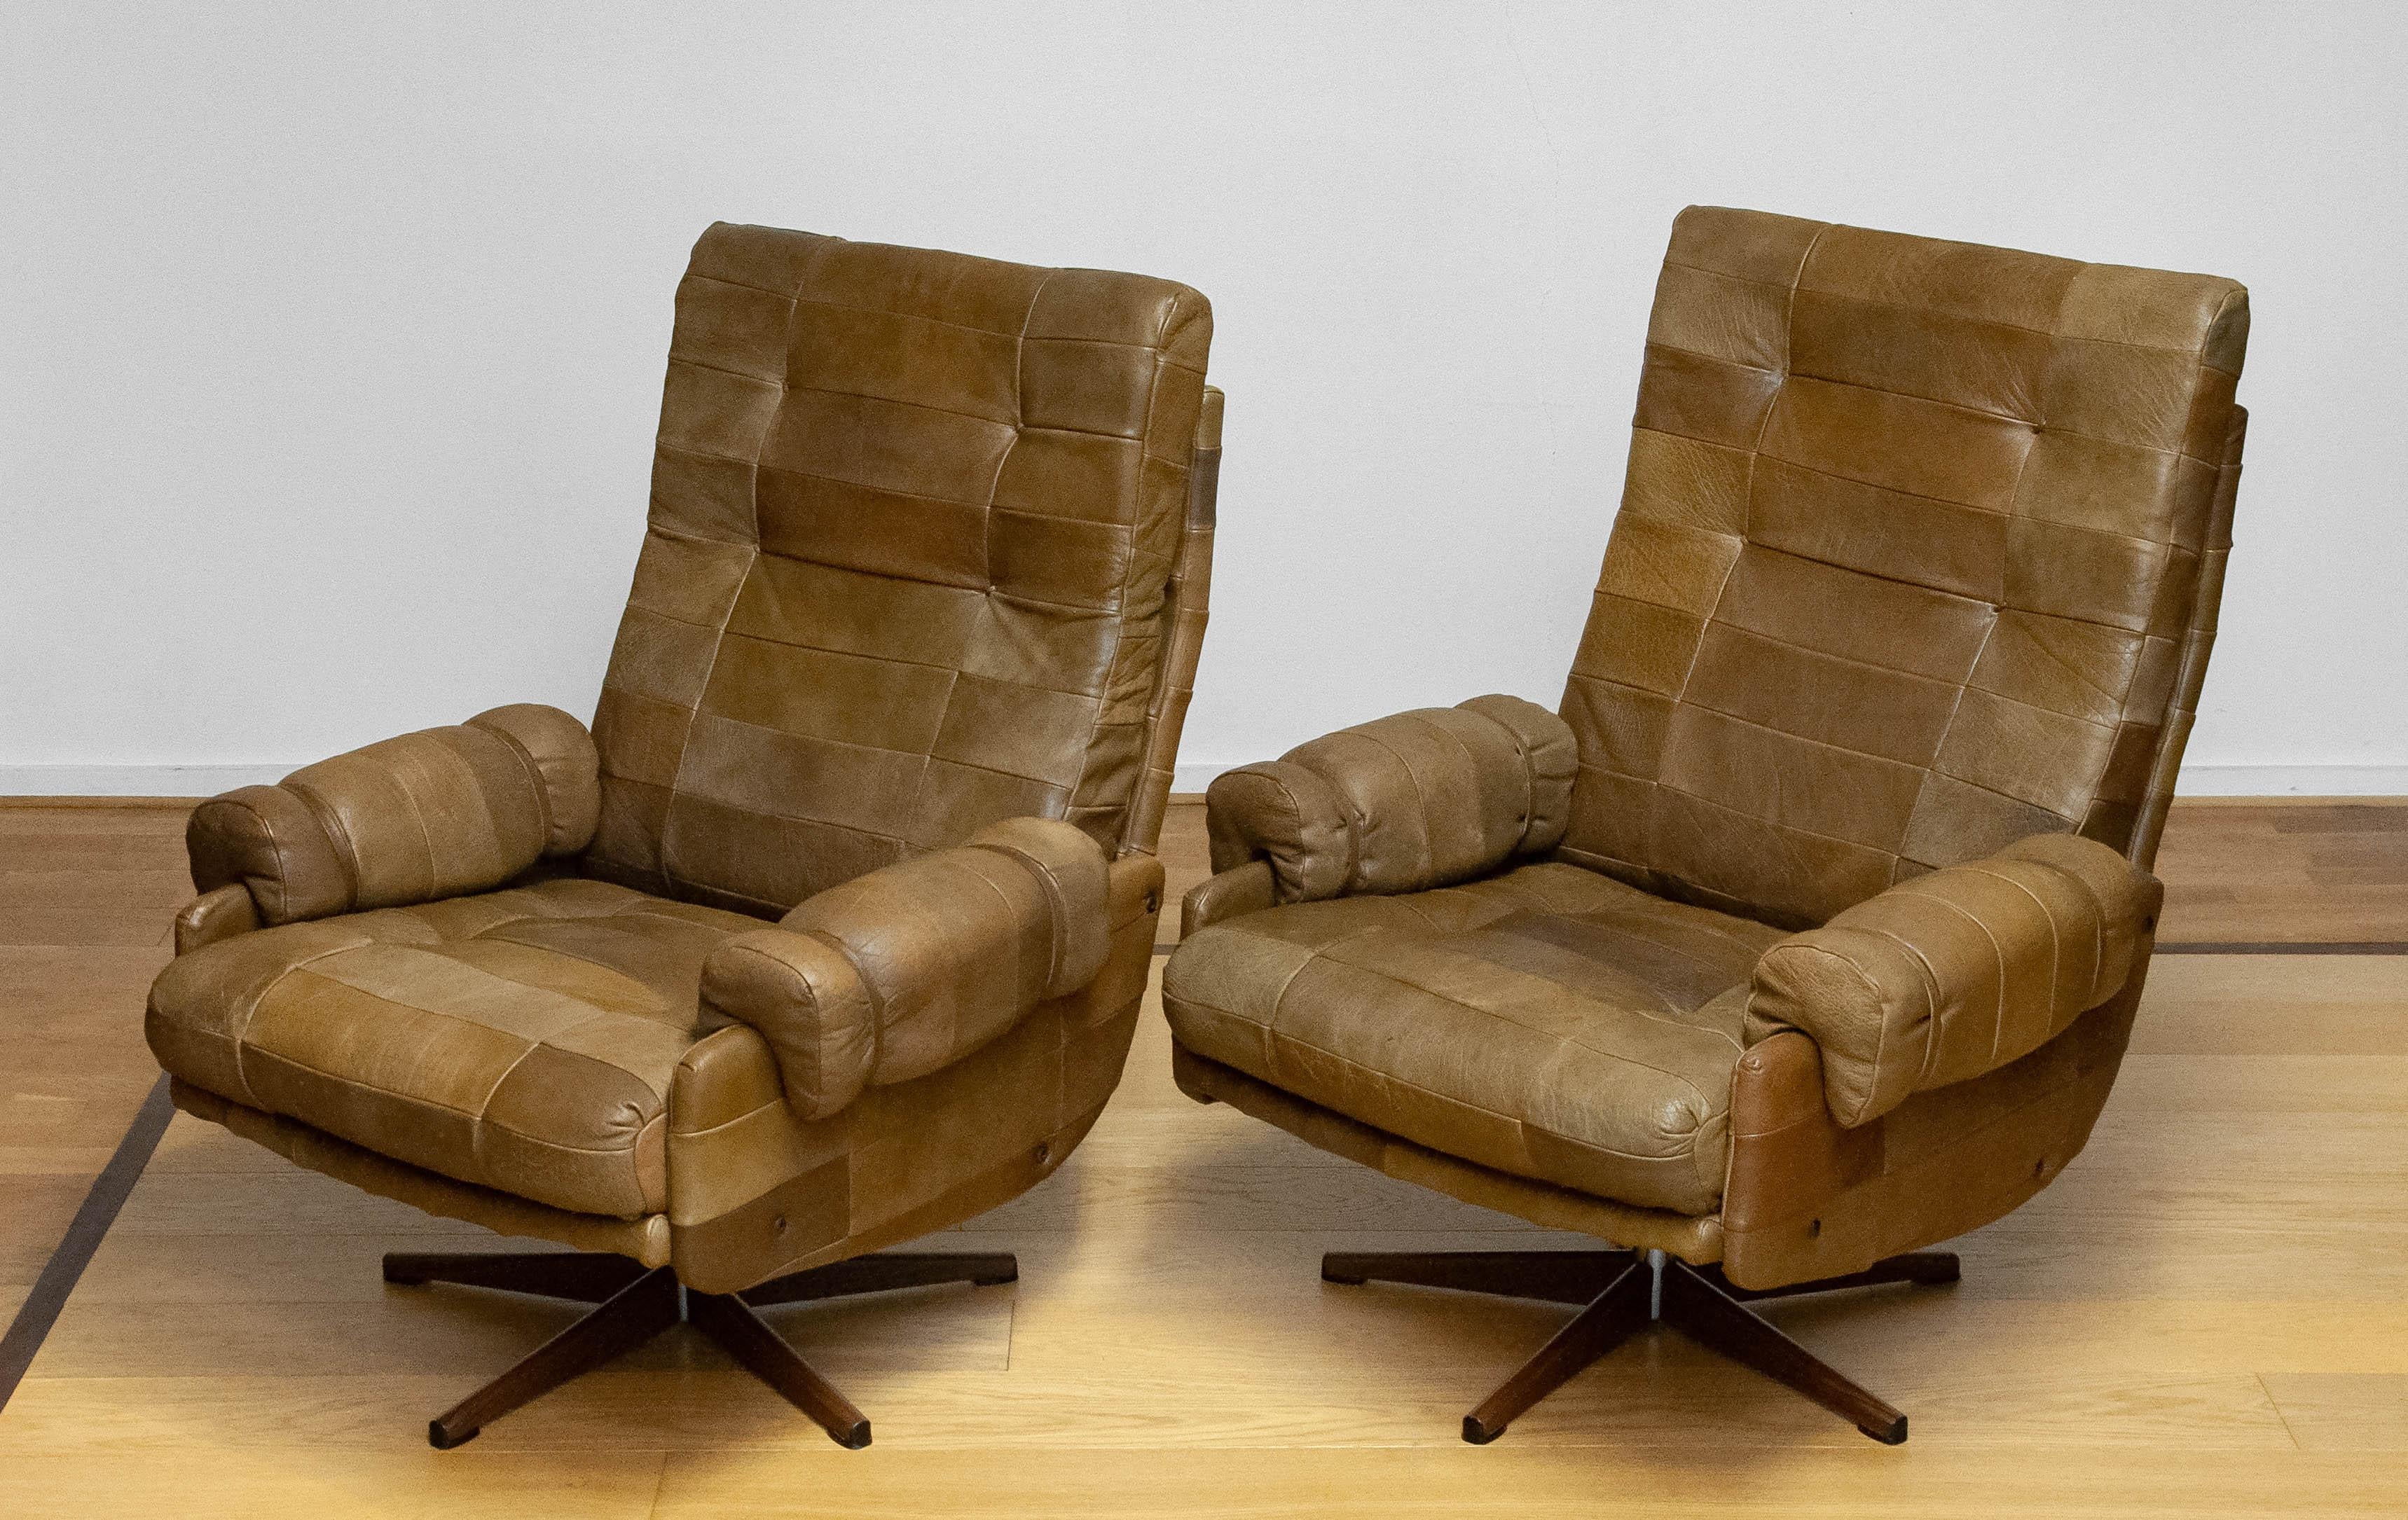 Scandinavian Modern 70s Pair Swivel Chairs By Arne Norell In Sturdy Olive Green Buffalo Leather